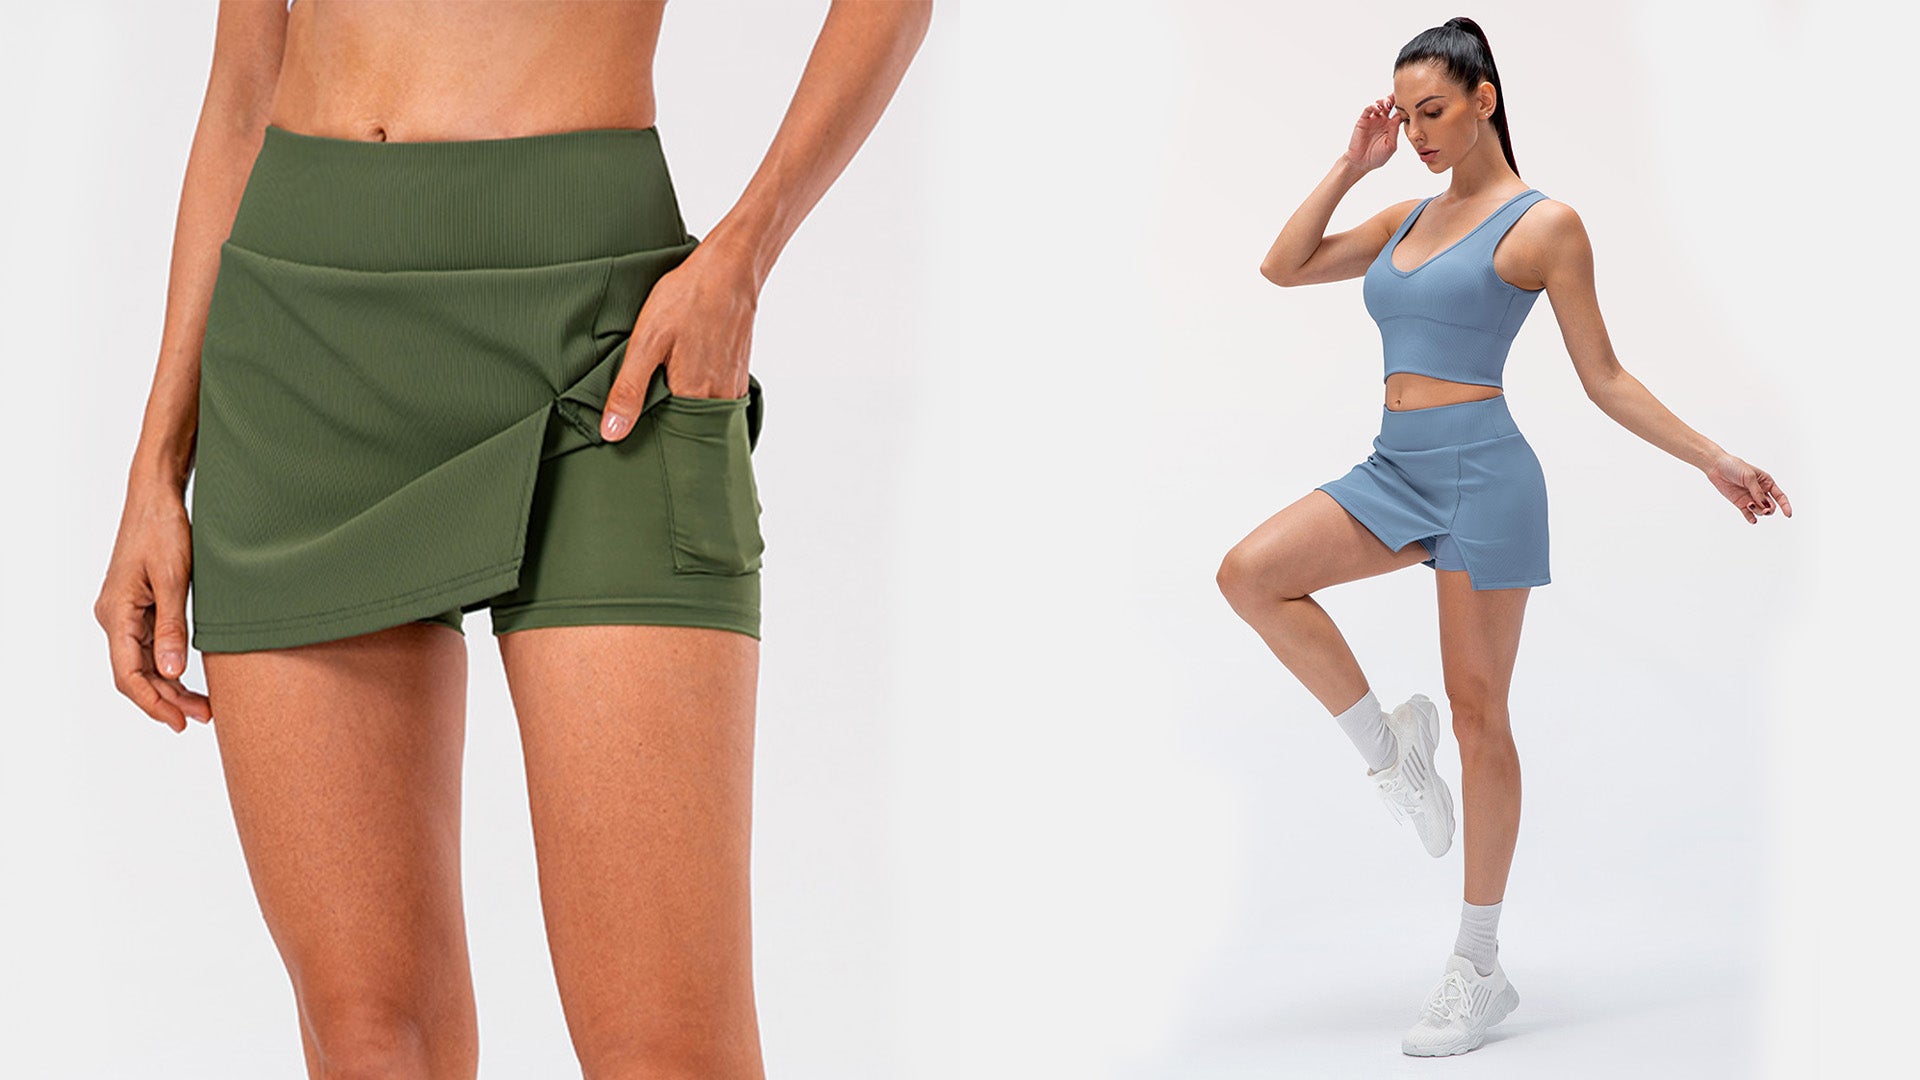 Noods Ribbed Tennis Skort - The Ideal Tennis Skirt for Combating High and Persistent Temperatures